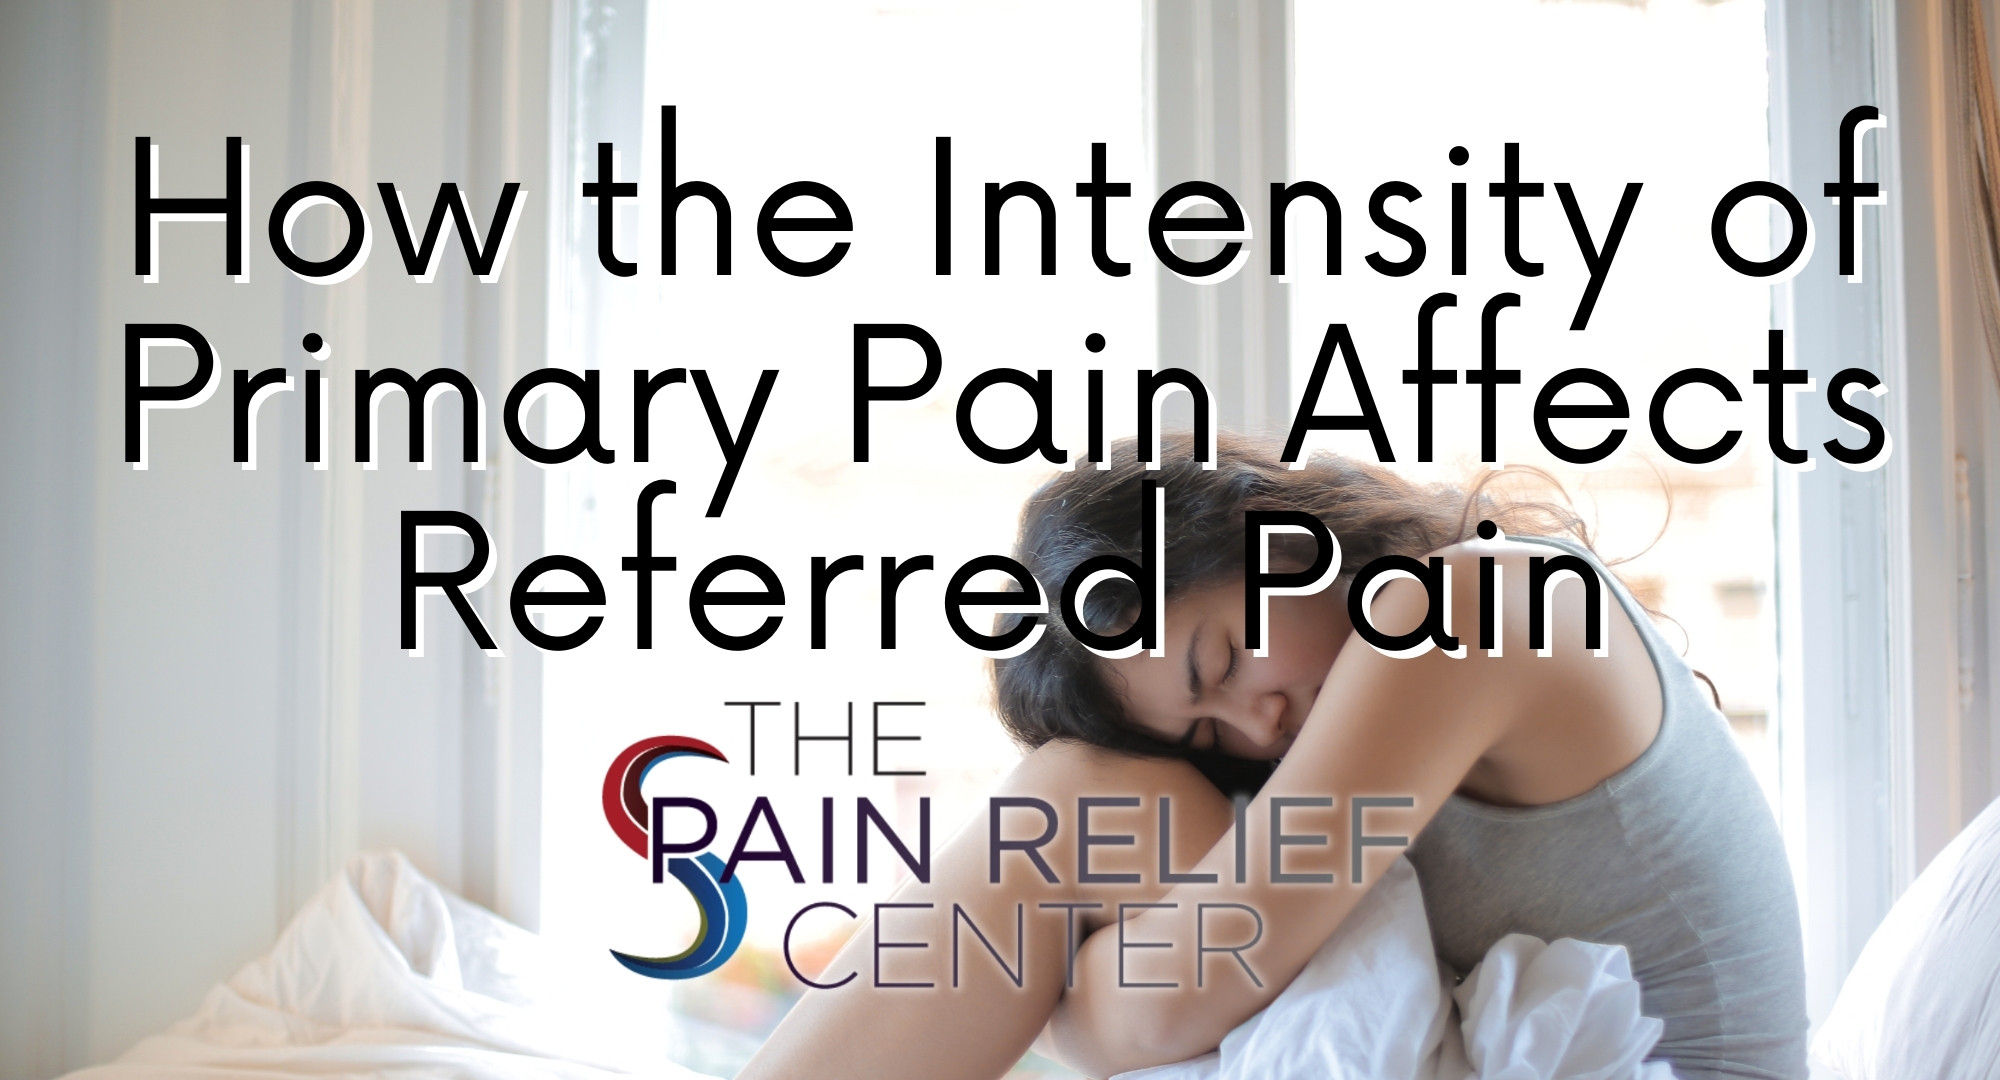 How the Intensity of Primary Pain Affects Referred Pain